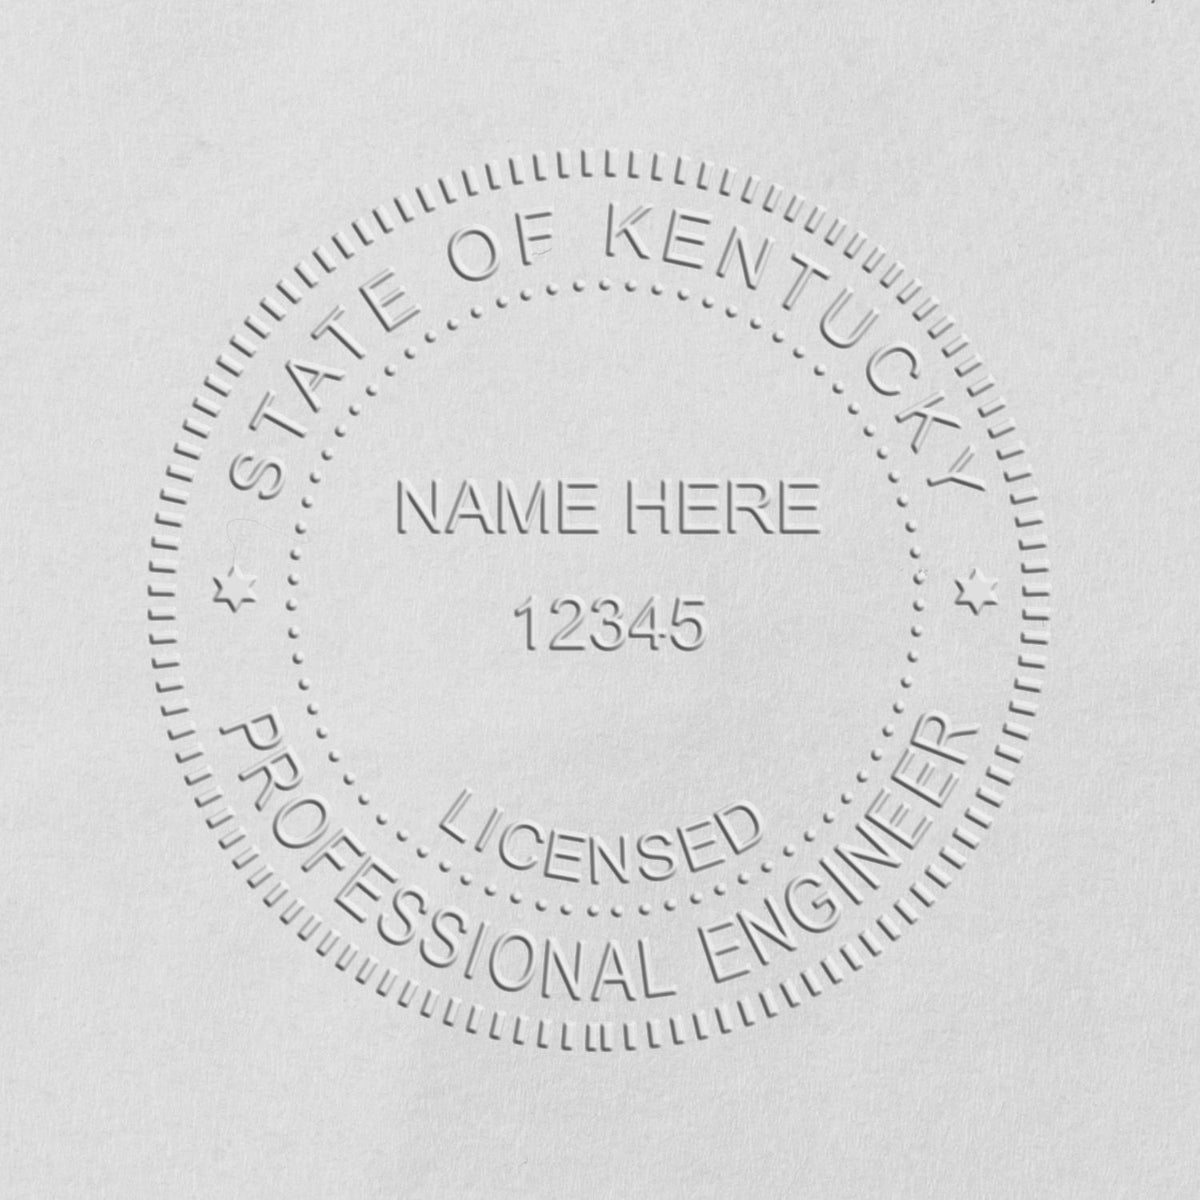 A photograph of the Kentucky Engineer Desk Seal stamp impression reveals a vivid, professional image of the on paper.